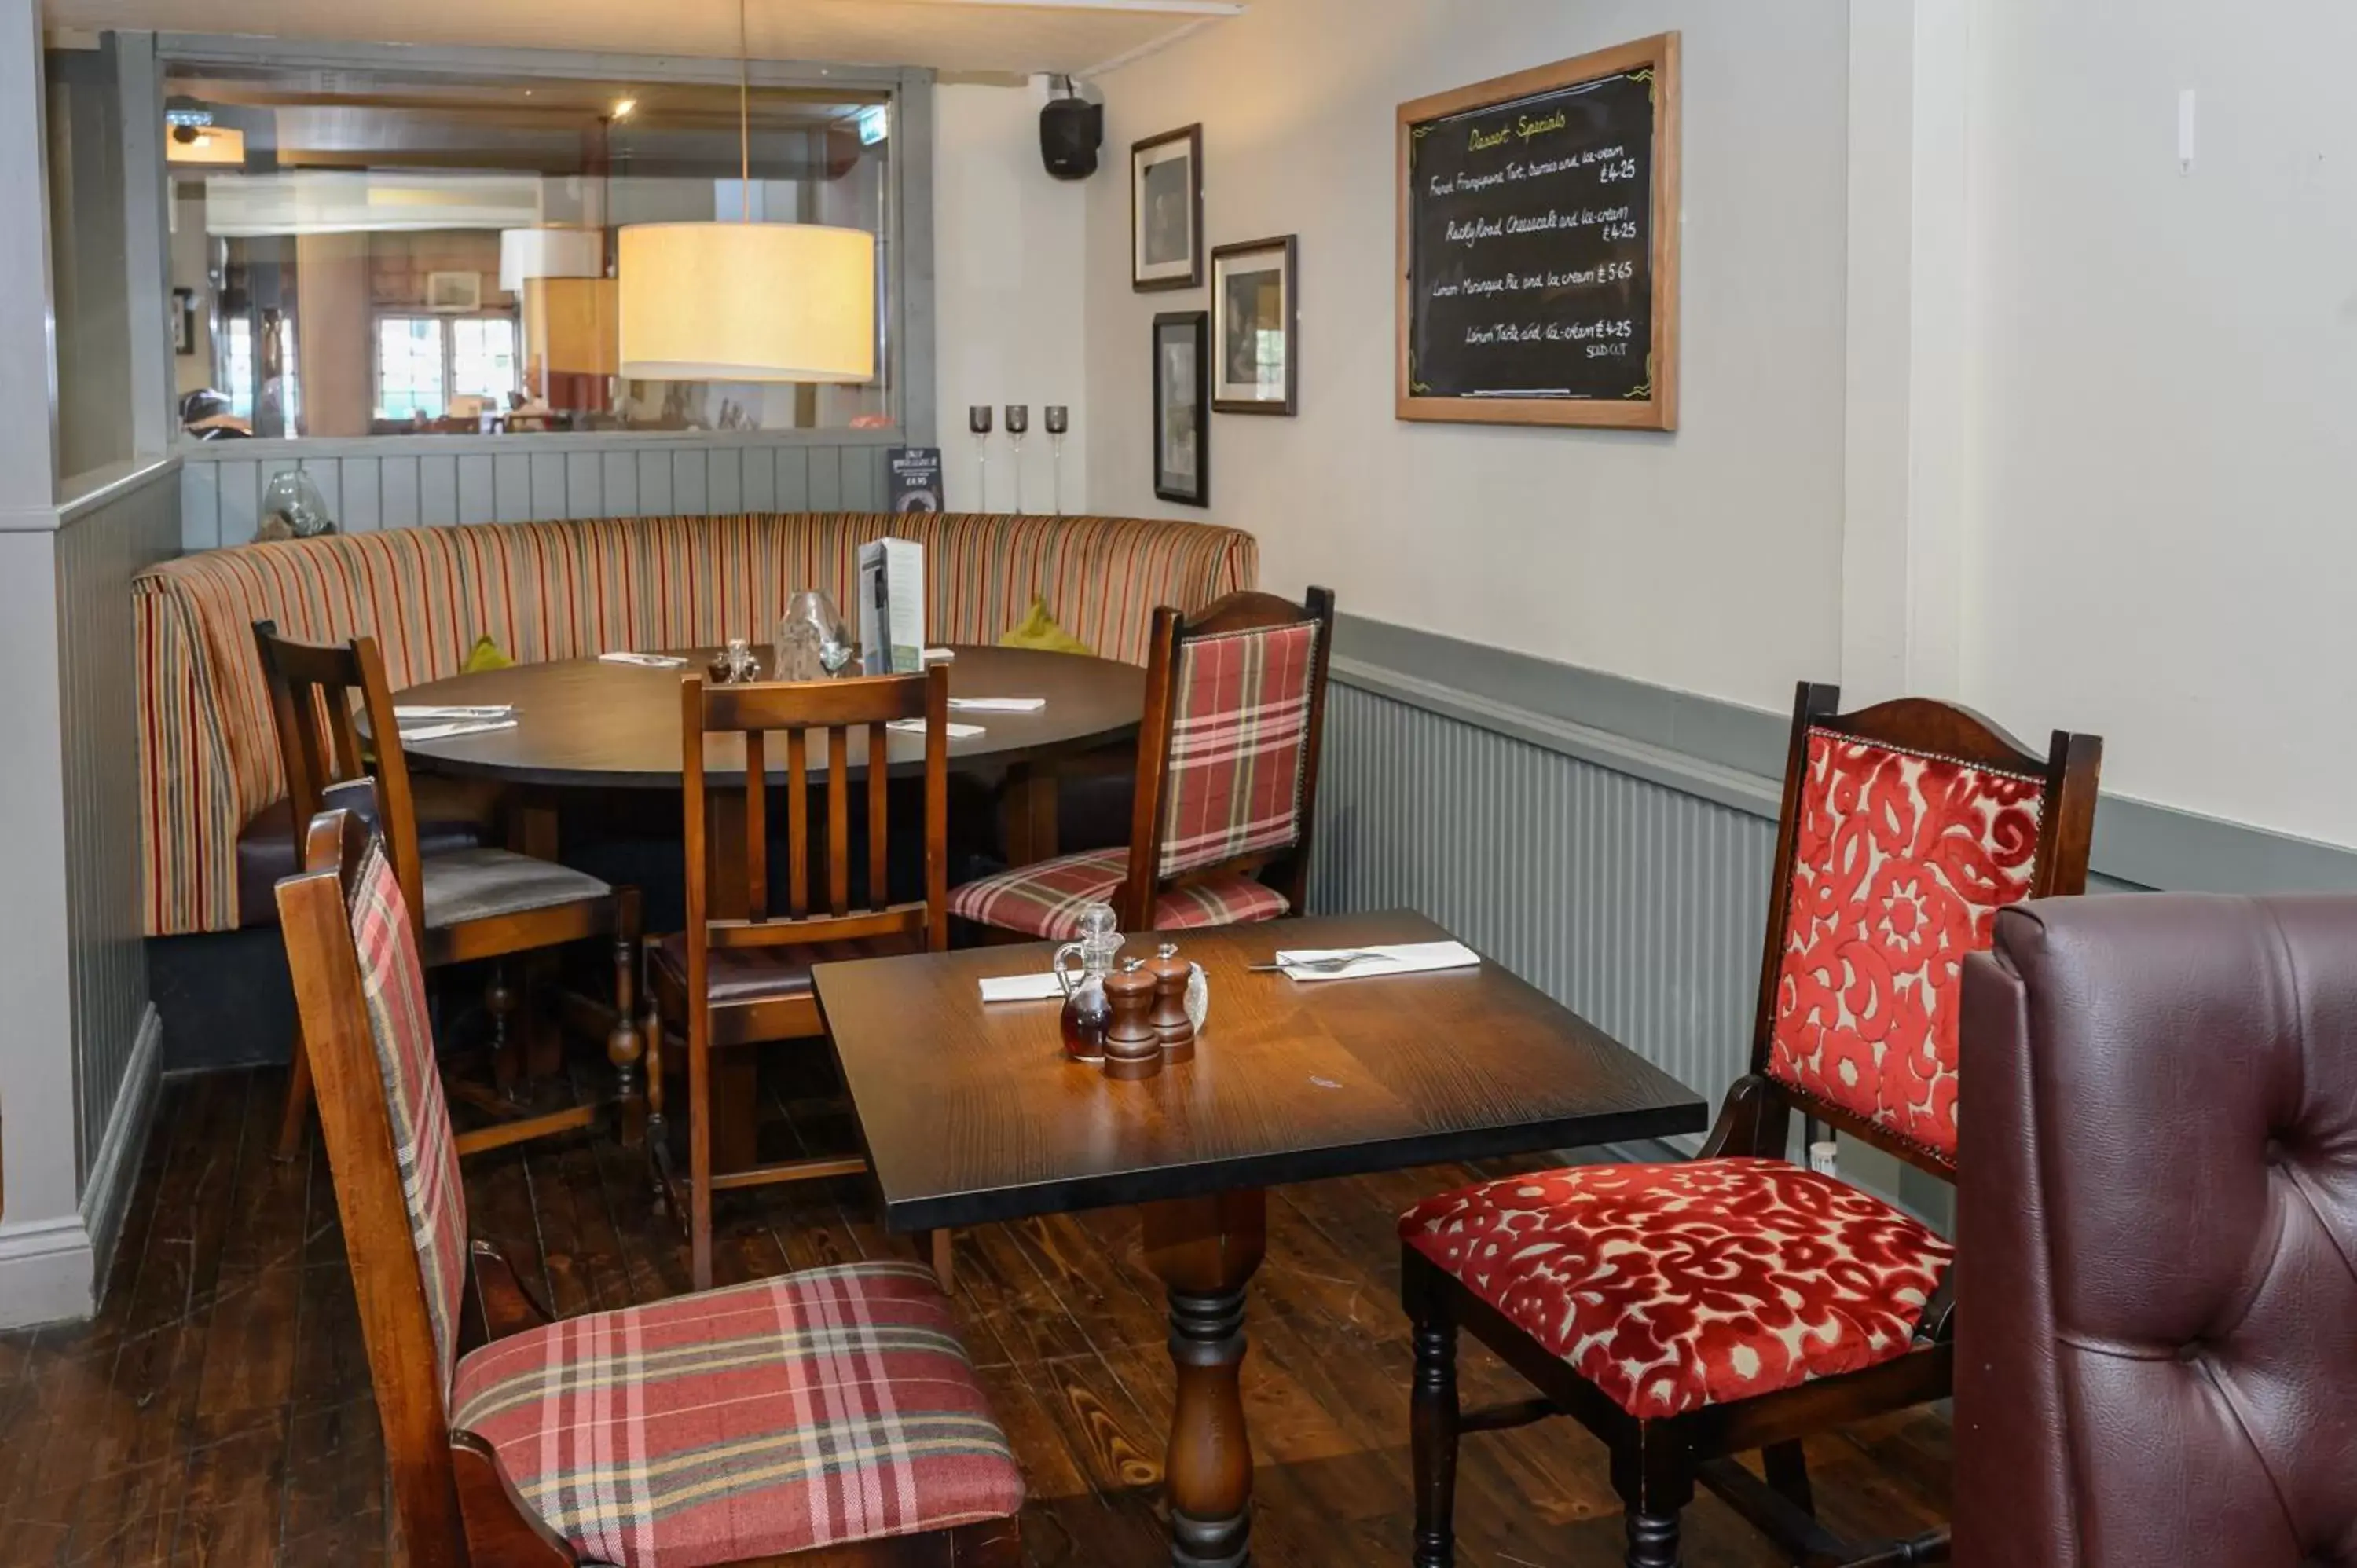 Dining area in Balfour Arms